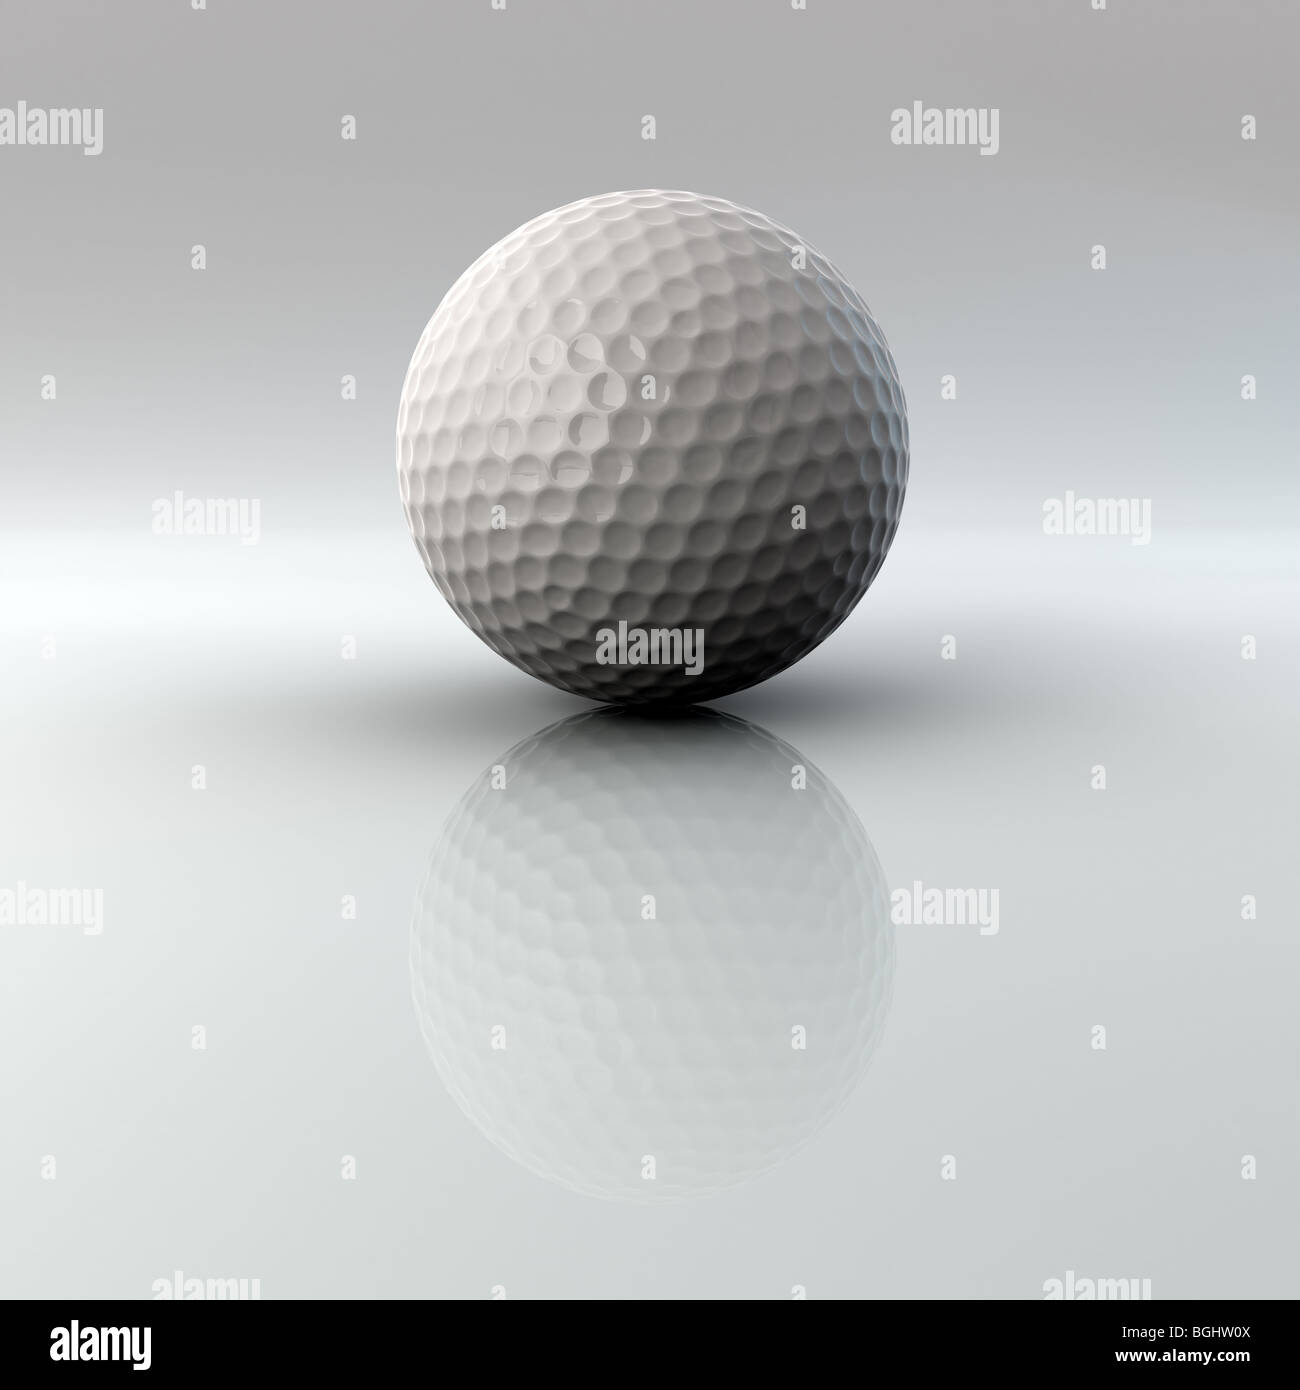 Golf ball with reflection and alpha Stock Photo